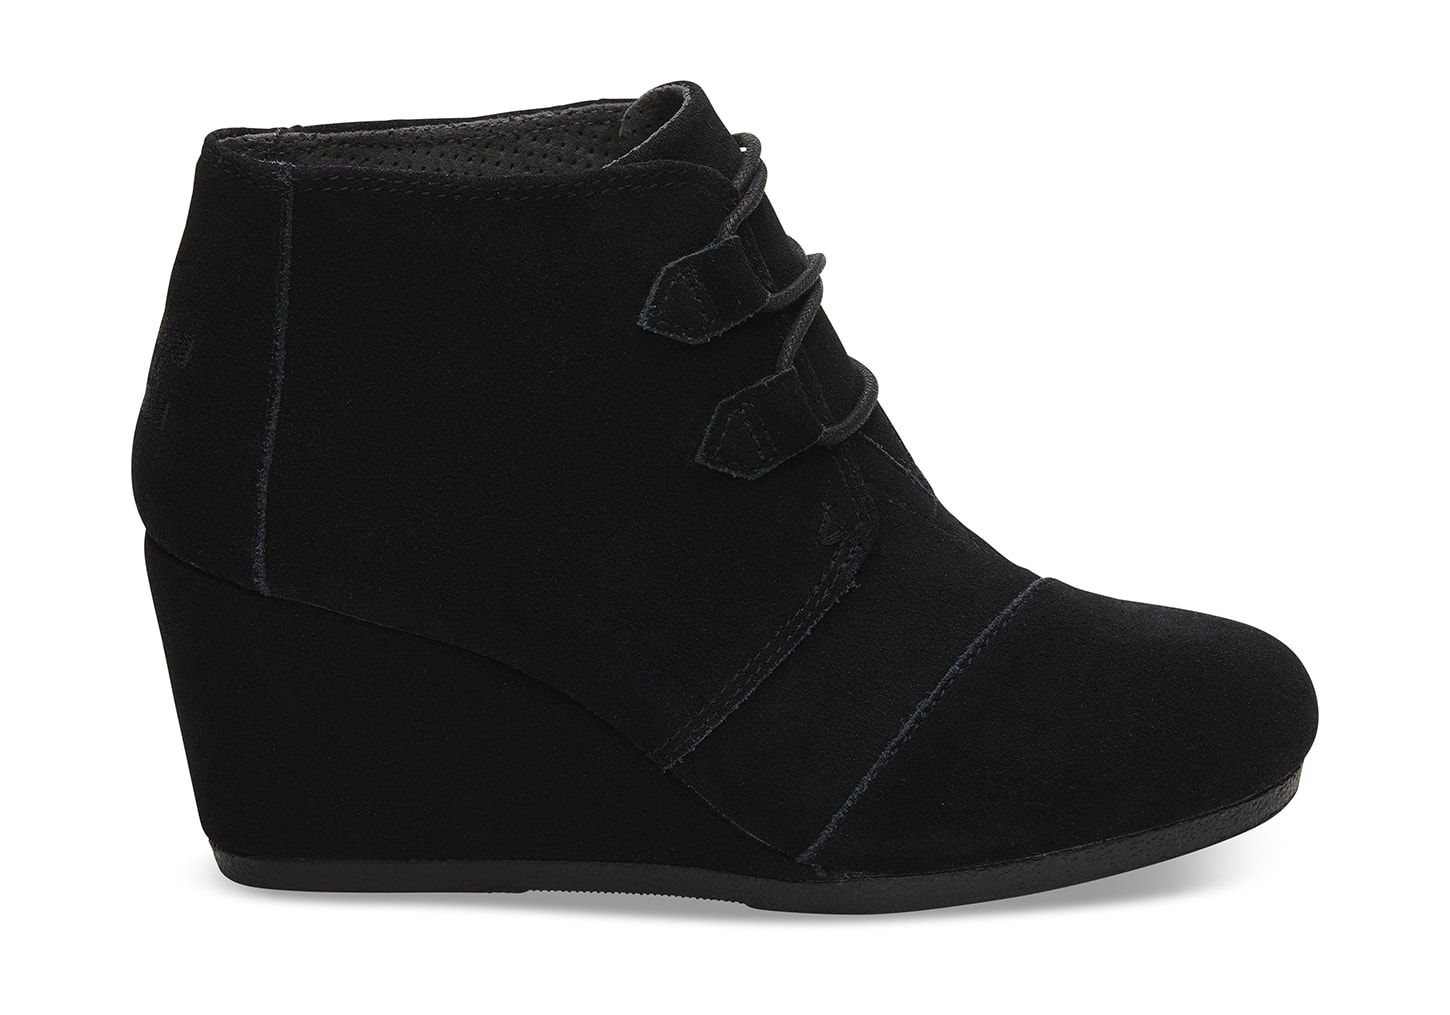 toms lace up wedge booties